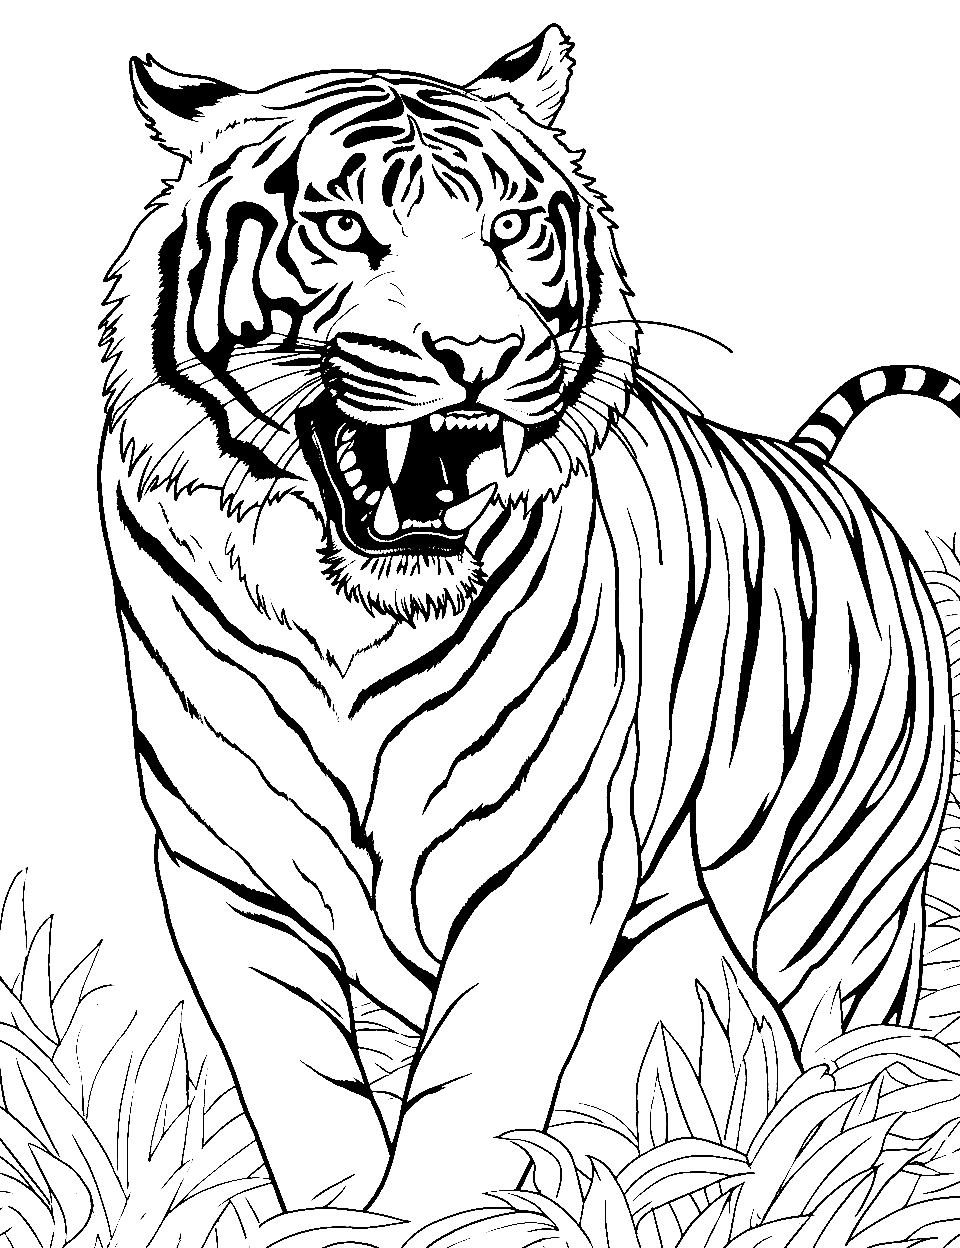 Roaring Jungle King Tiger Coloring Page - A fierce tiger roaring aloud in the midst of the jungle.